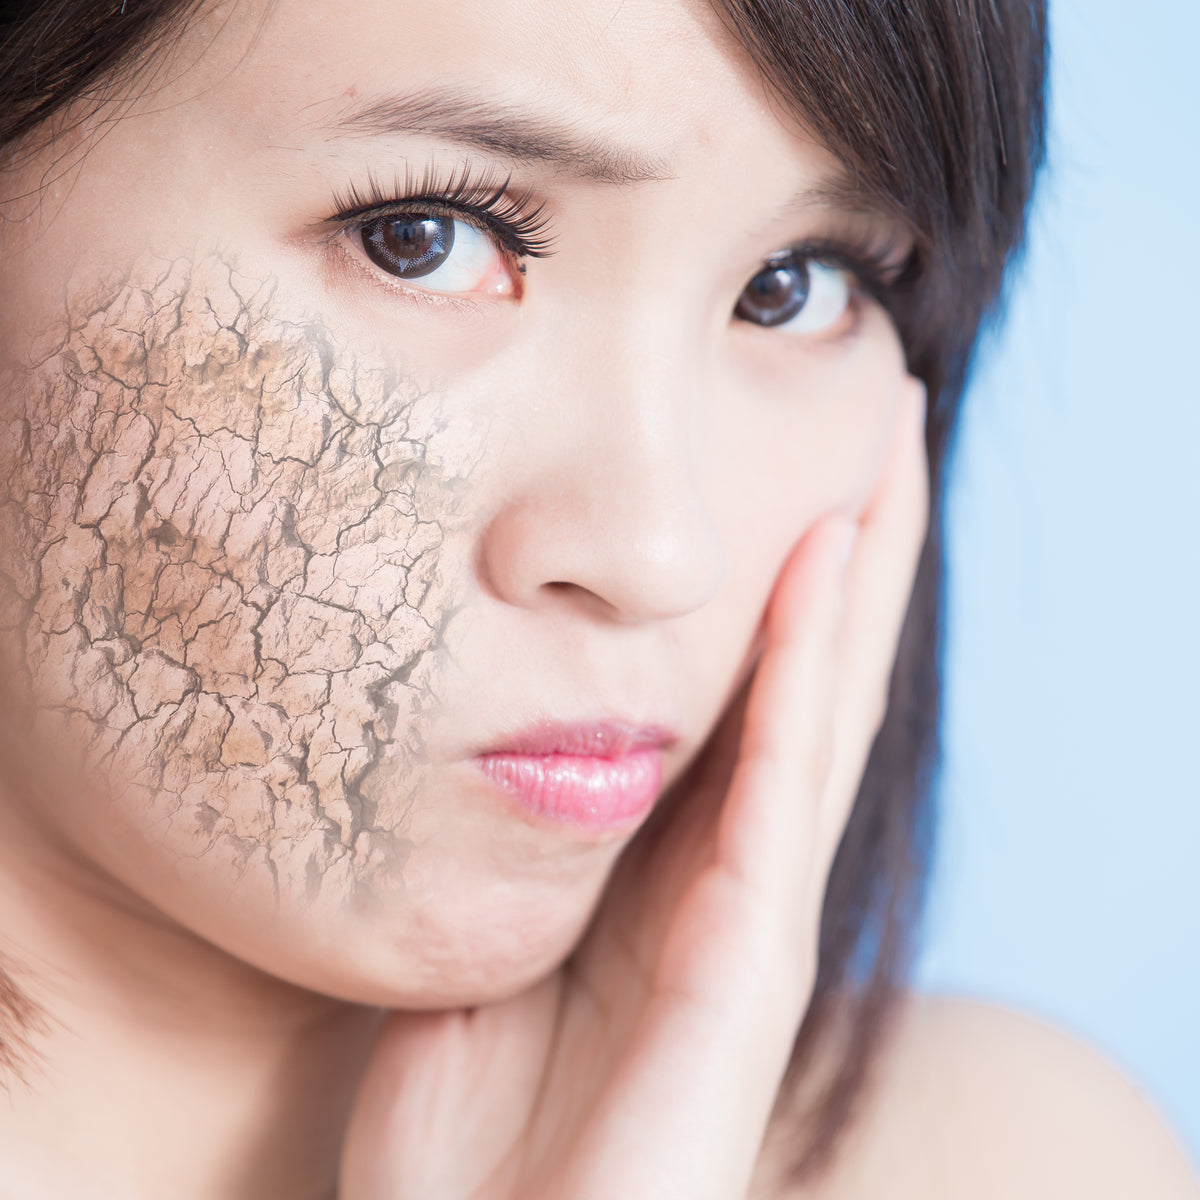 So many variables can impact the barrier of your skin, we aim to explain.